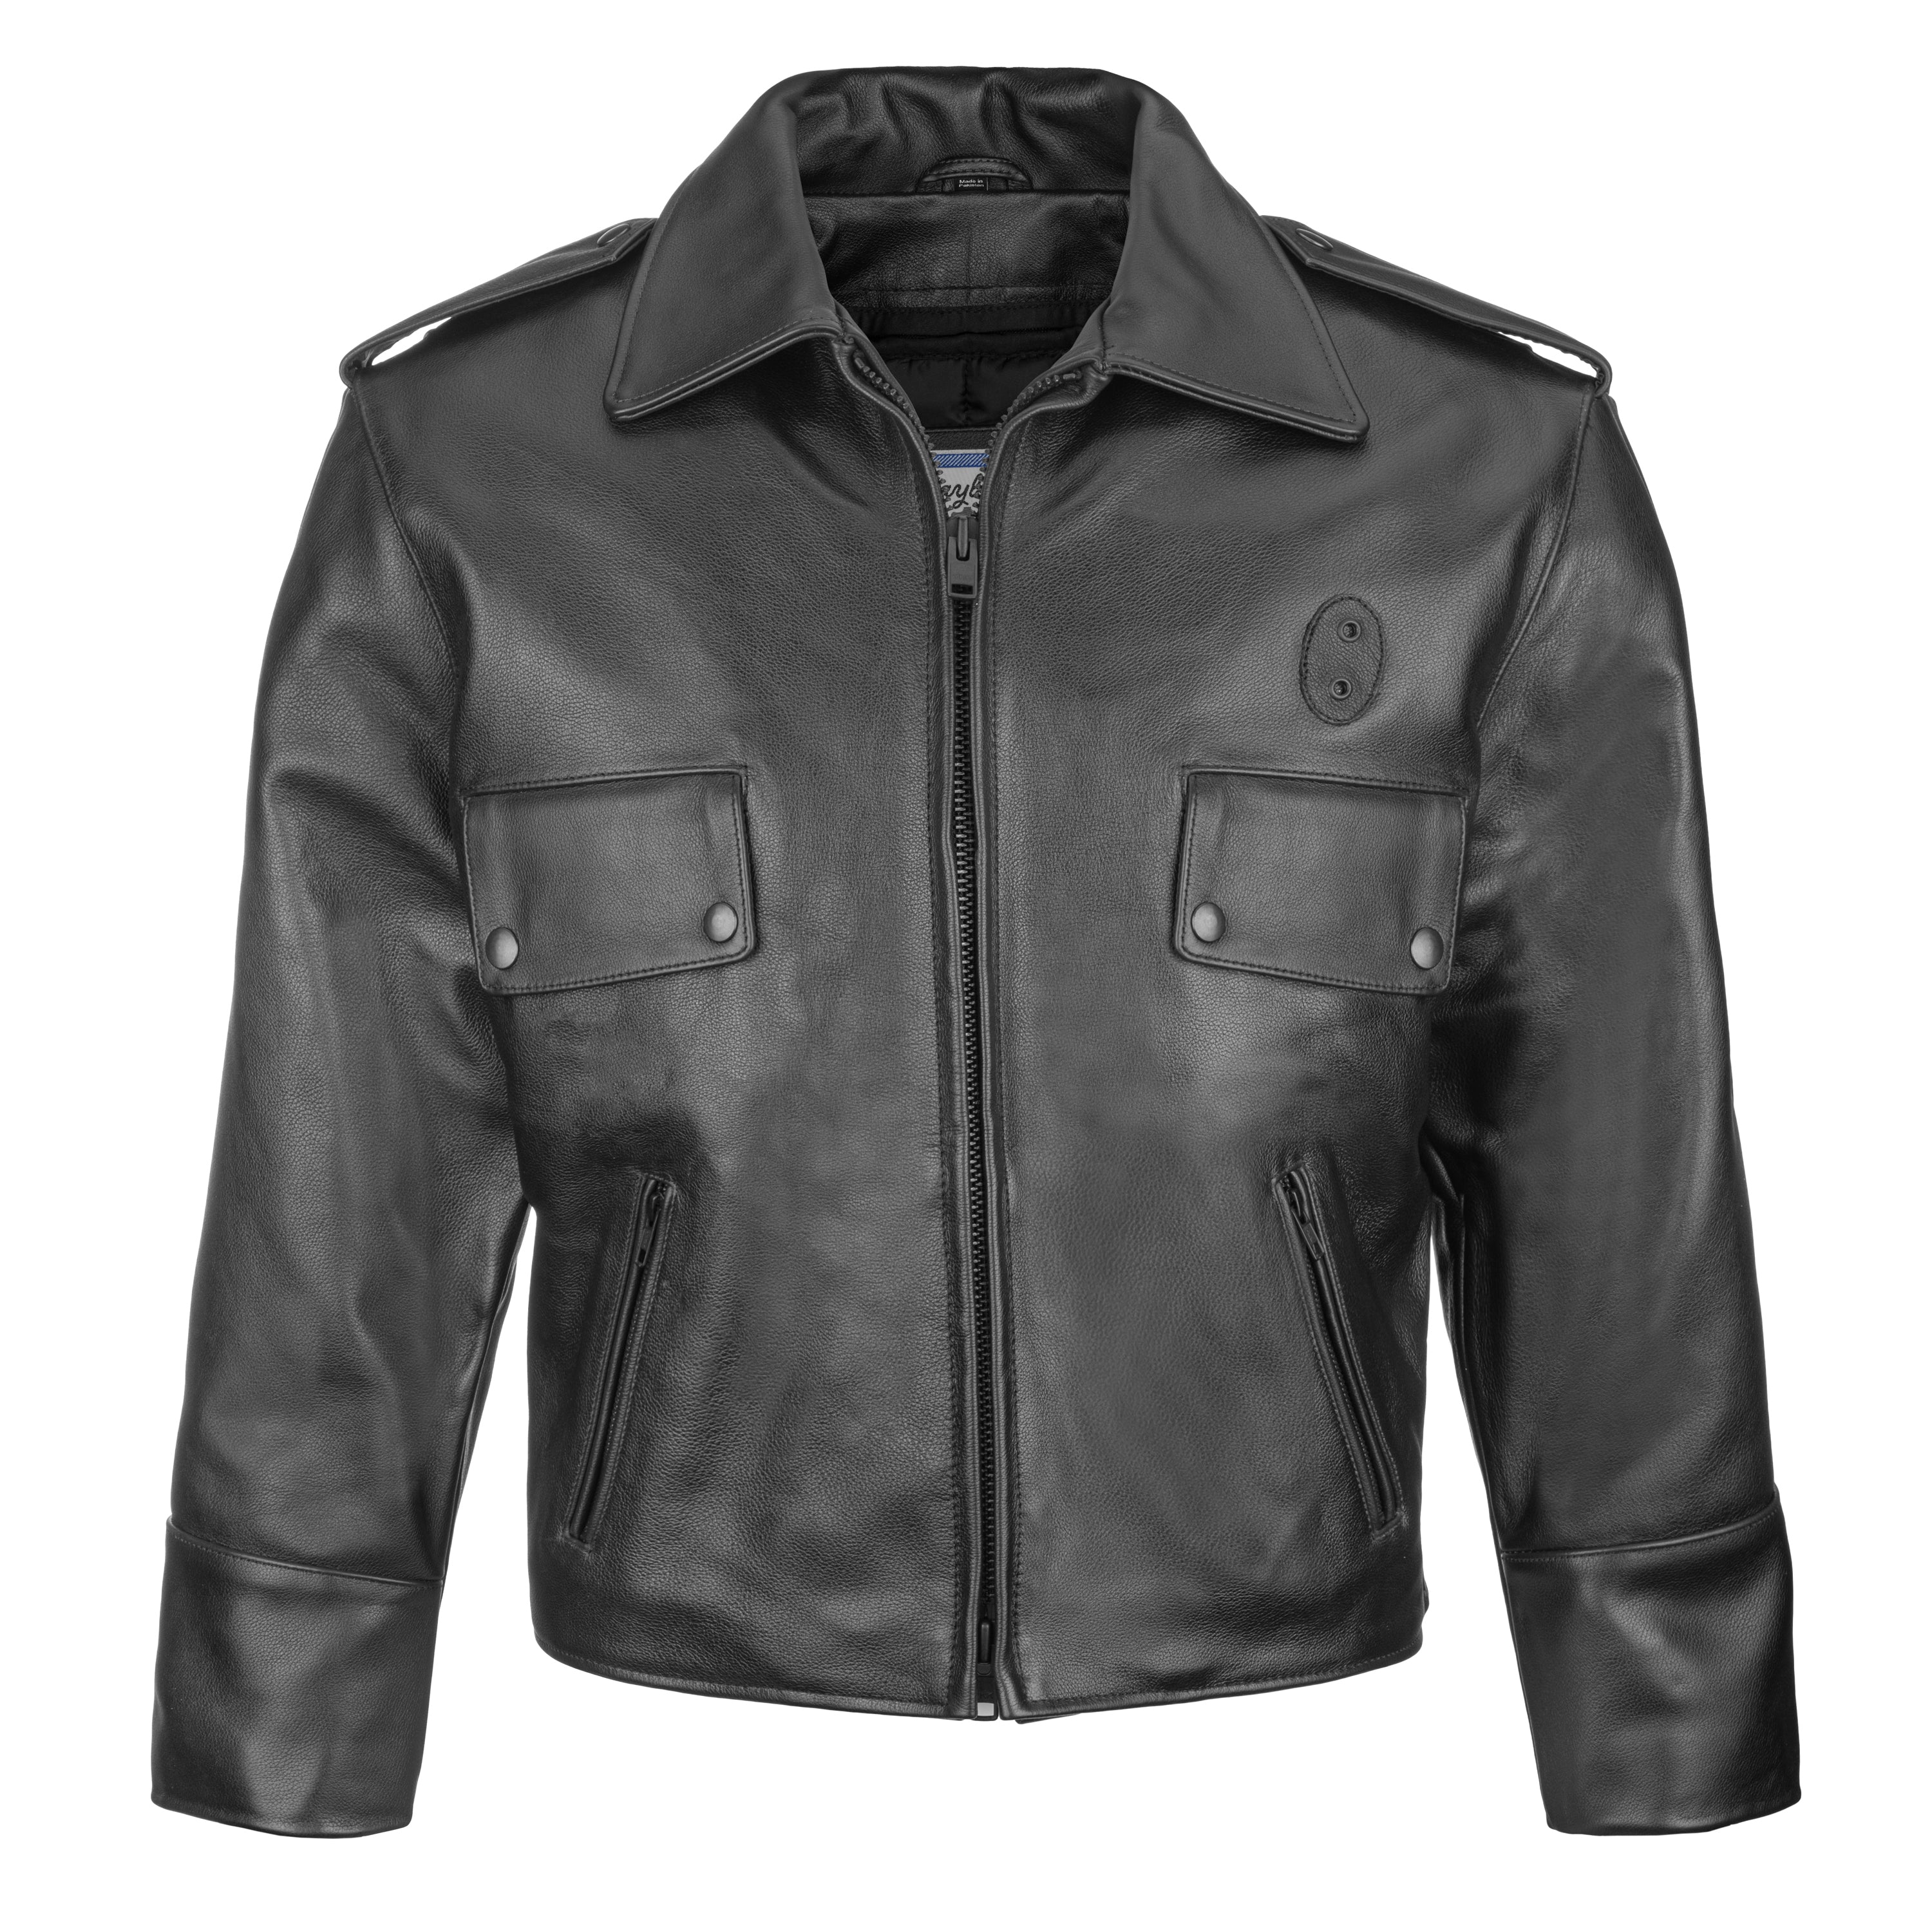 Boston Cowhide Leather Mid Length Police Jacket – Taylor's